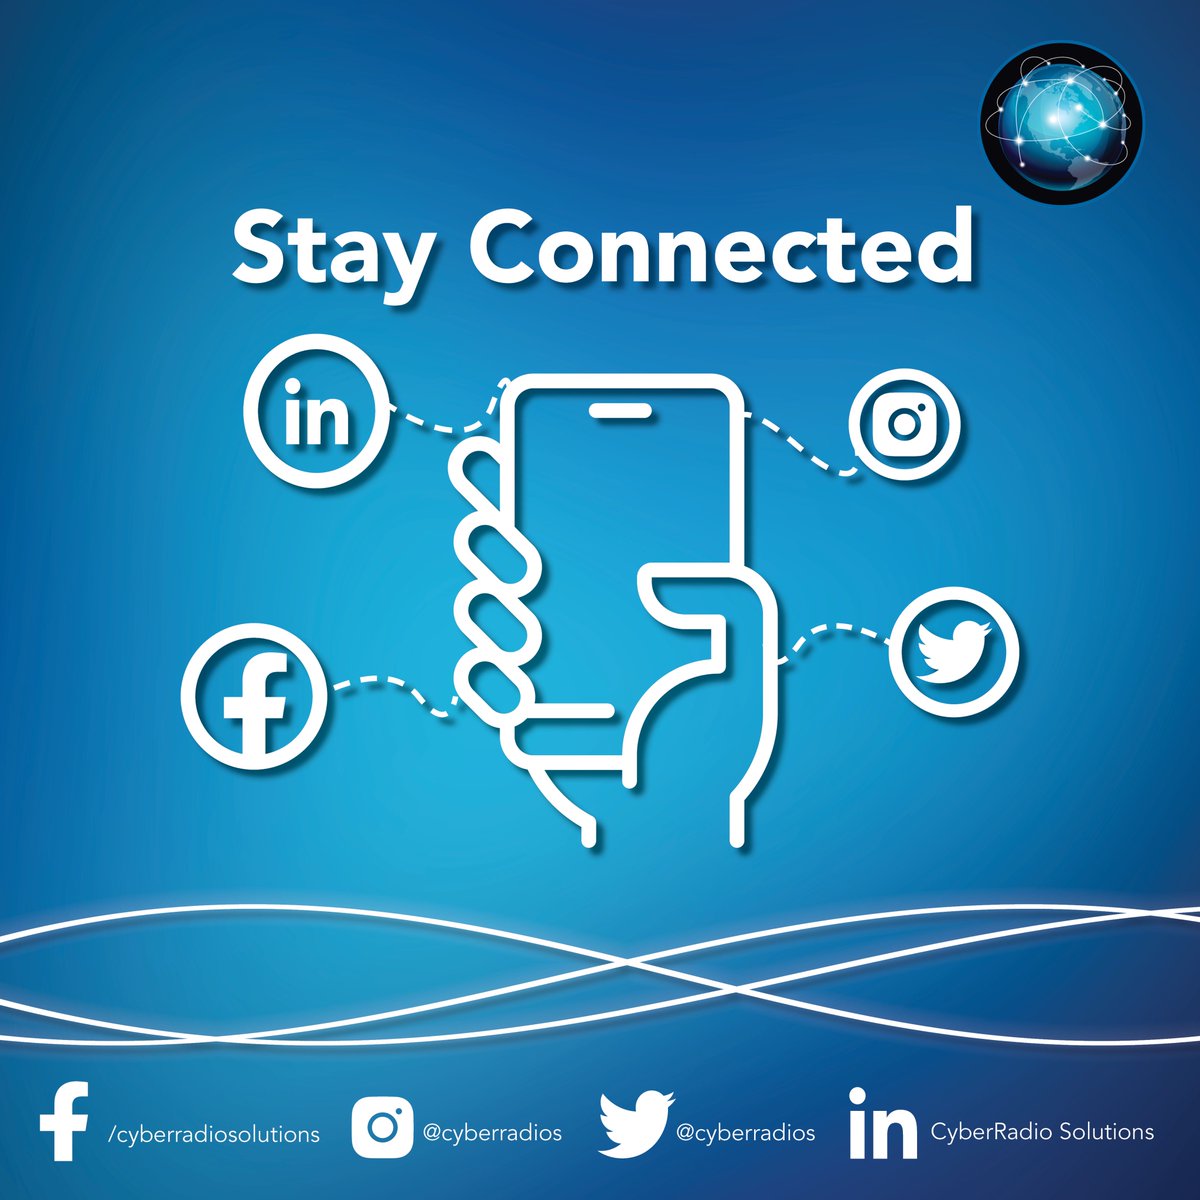 It's International Social Media Day! Stay connected with CyberRadio Solutions on all of our social media platforms.

#Military #engineers #success #microwaveradios #engineering #cyberradiosolutions #innovation   #tuners #receivers #transceiver #lowfrequency #channeldensity #STEM